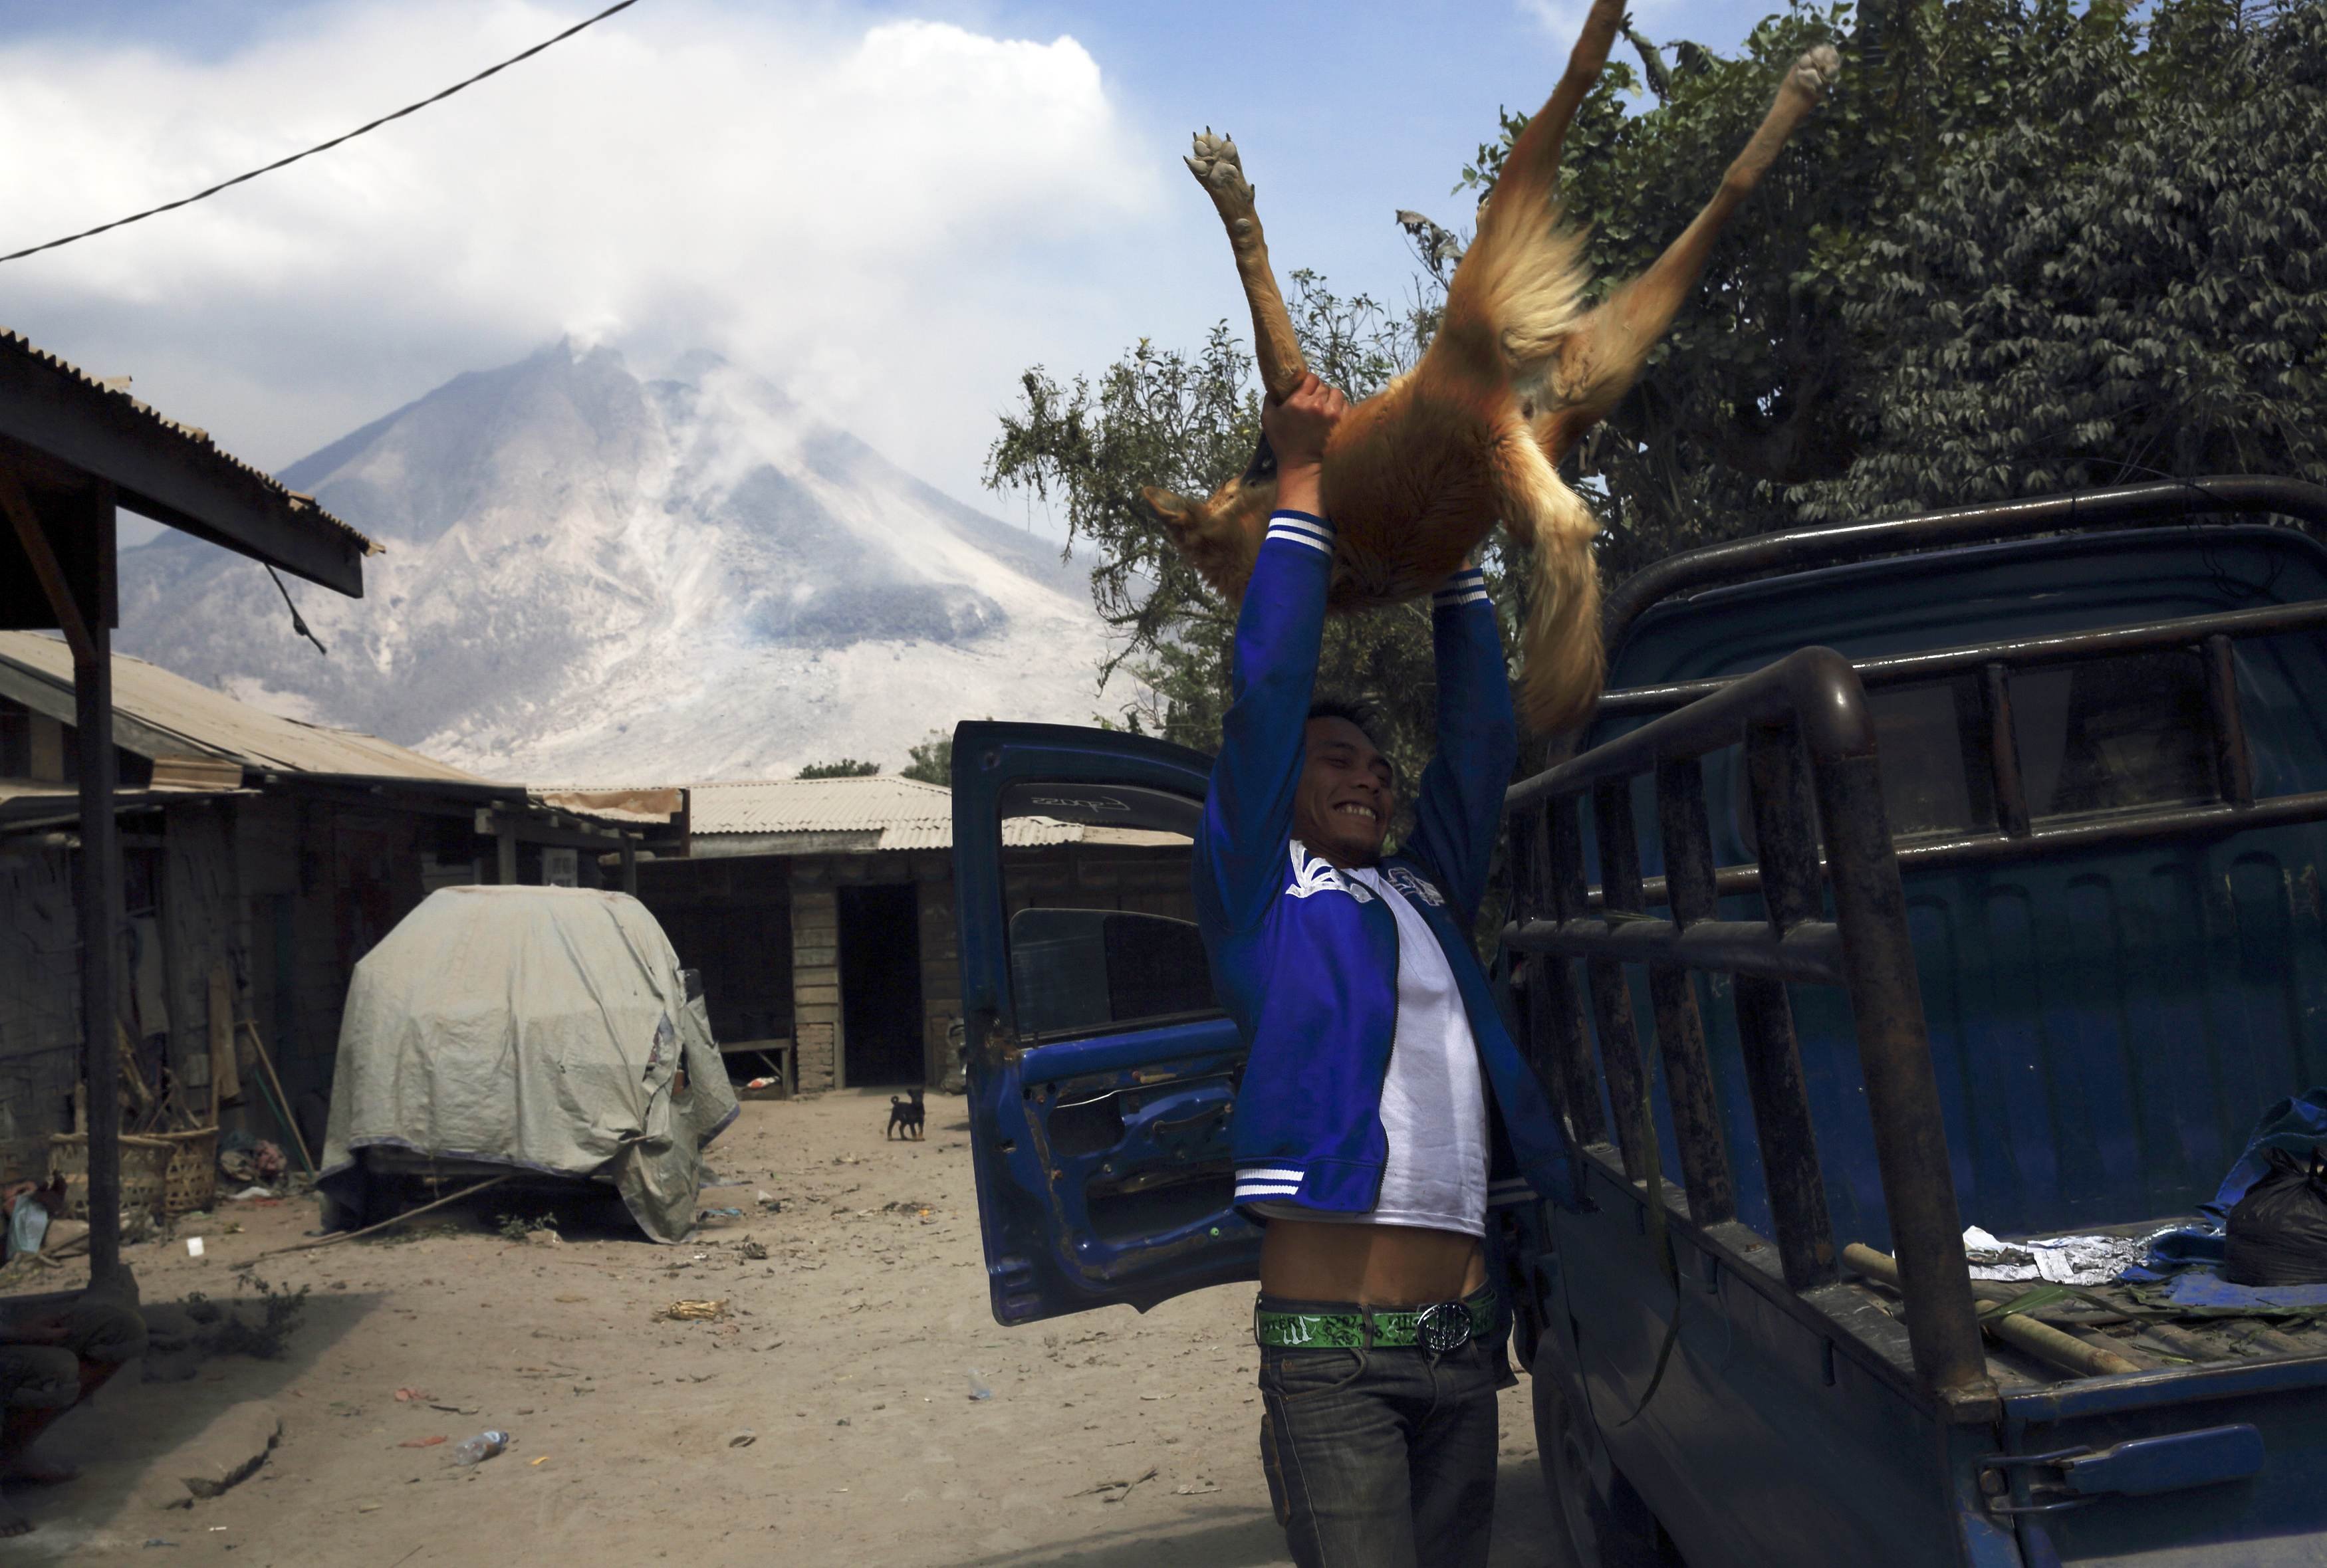 A villager lifts his dog onto a truck to evacuate as Mount Sinabung spews ash at Pintu Besi village in Karo district, North Sumatra province Feb. 5, 2014.